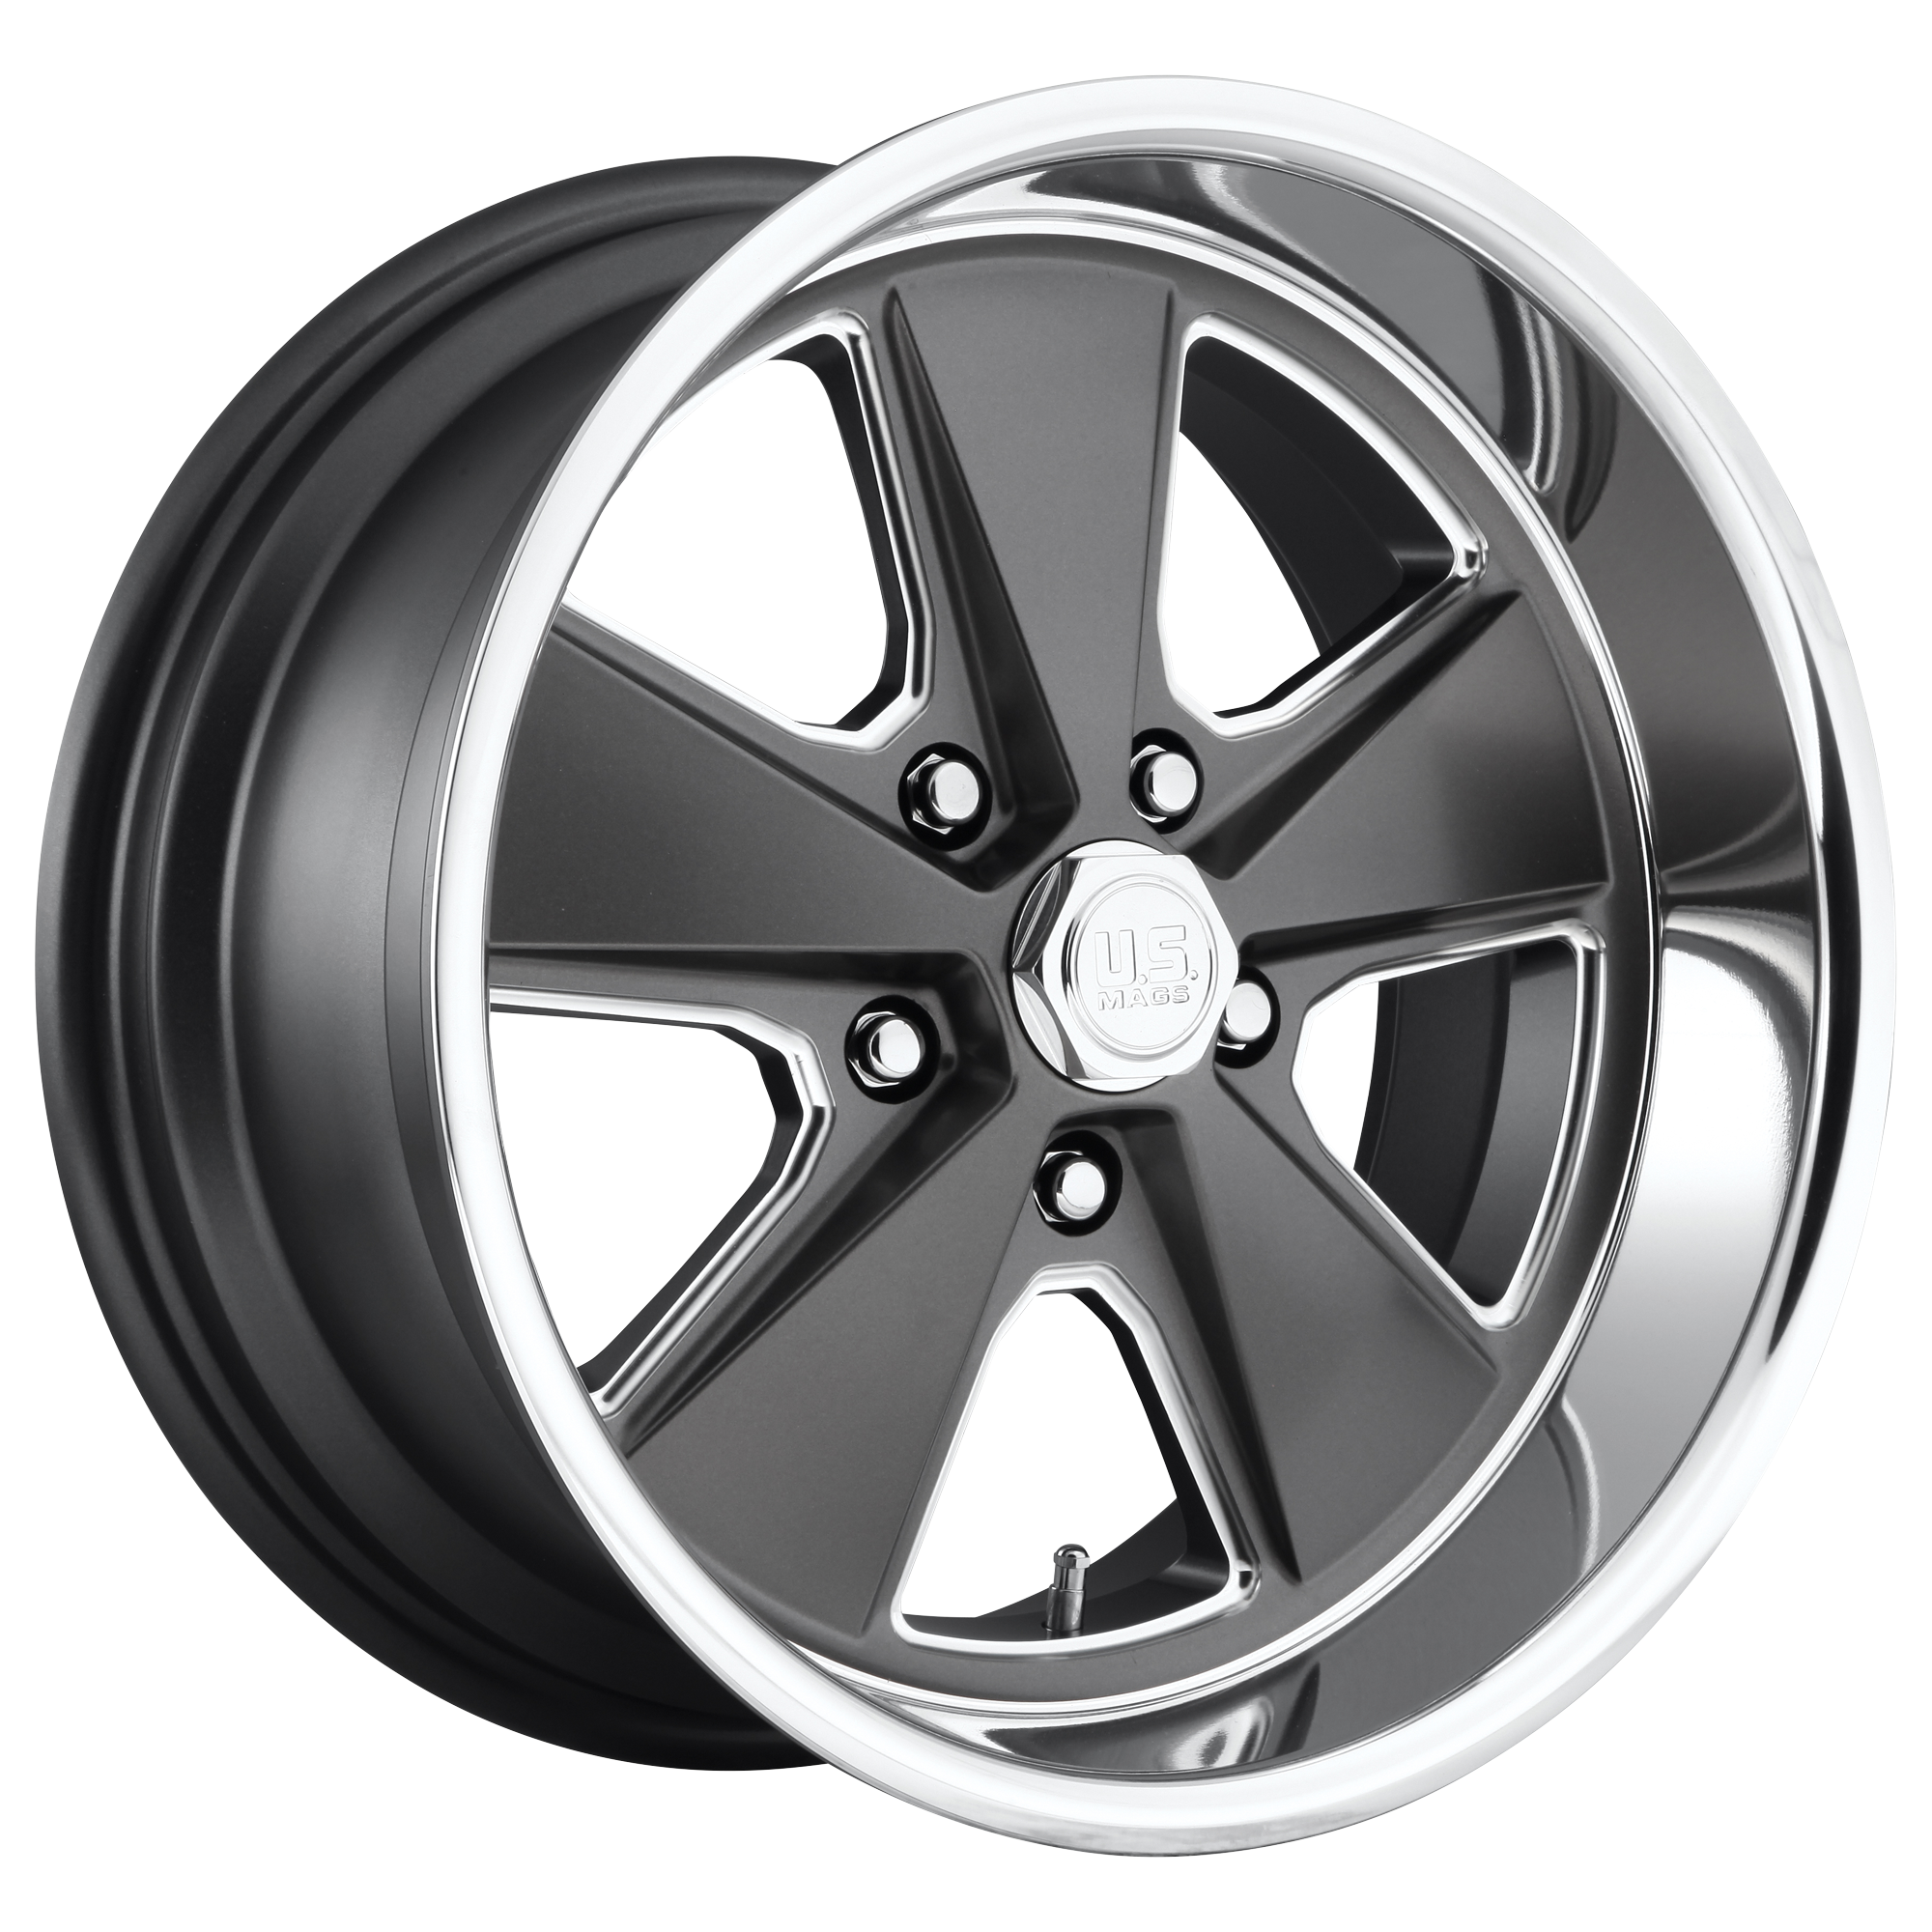 ROADSTER 20x8 5x127.00 MATTE GUN METAL MACHINED (1 mm) - Tires and Engine Performance